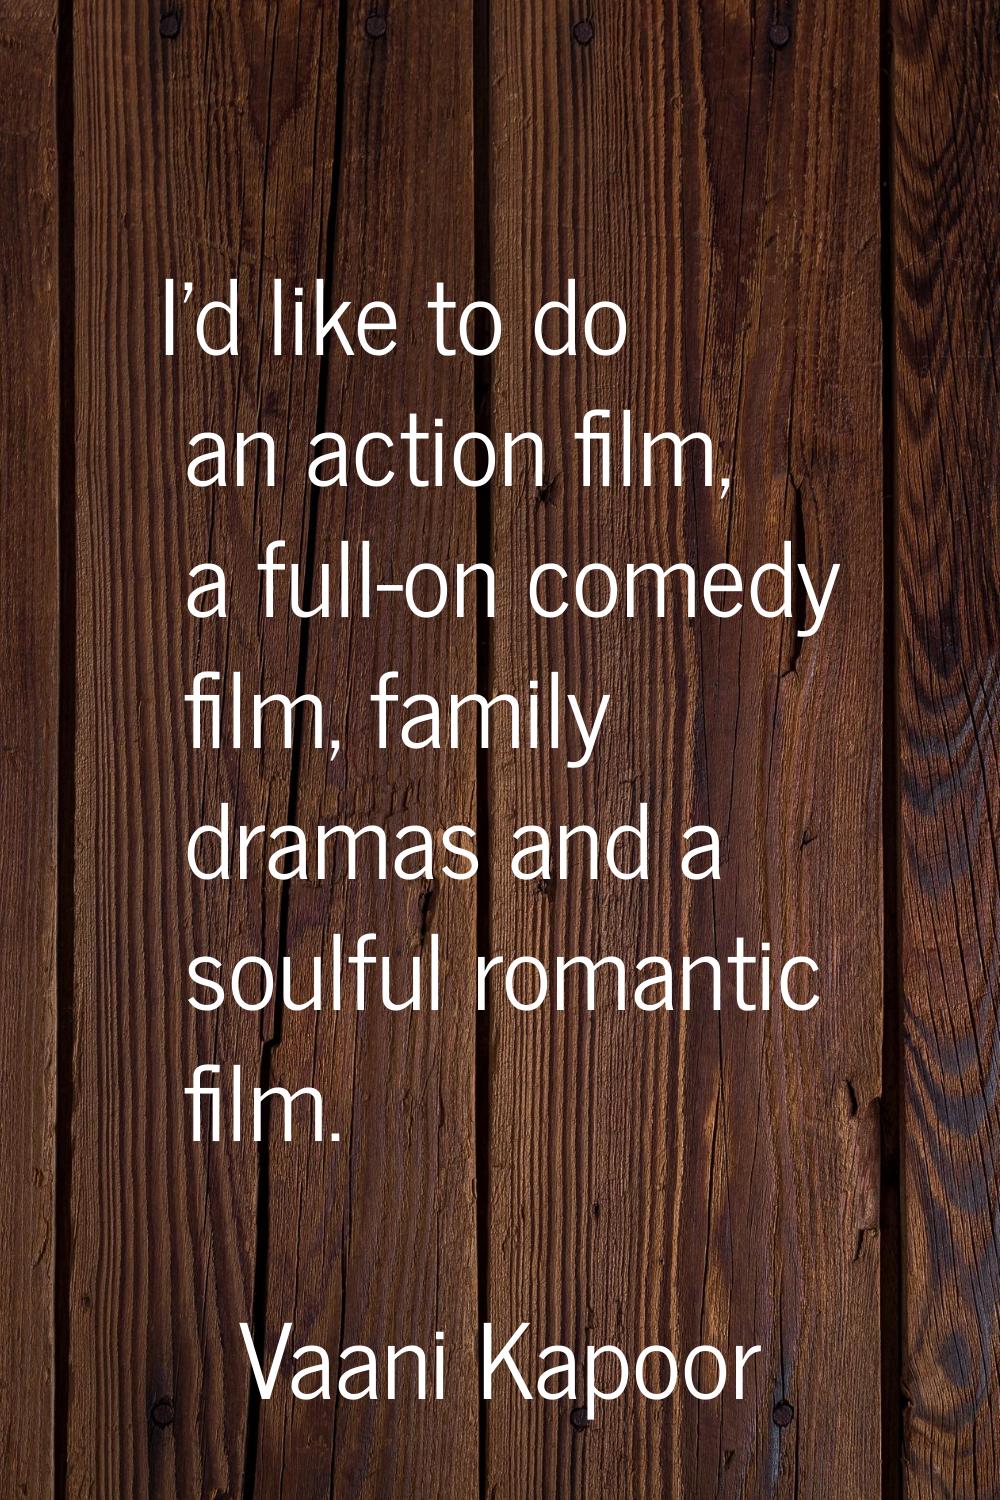 I'd like to do an action film, a full-on comedy film, family dramas and a soulful romantic film.